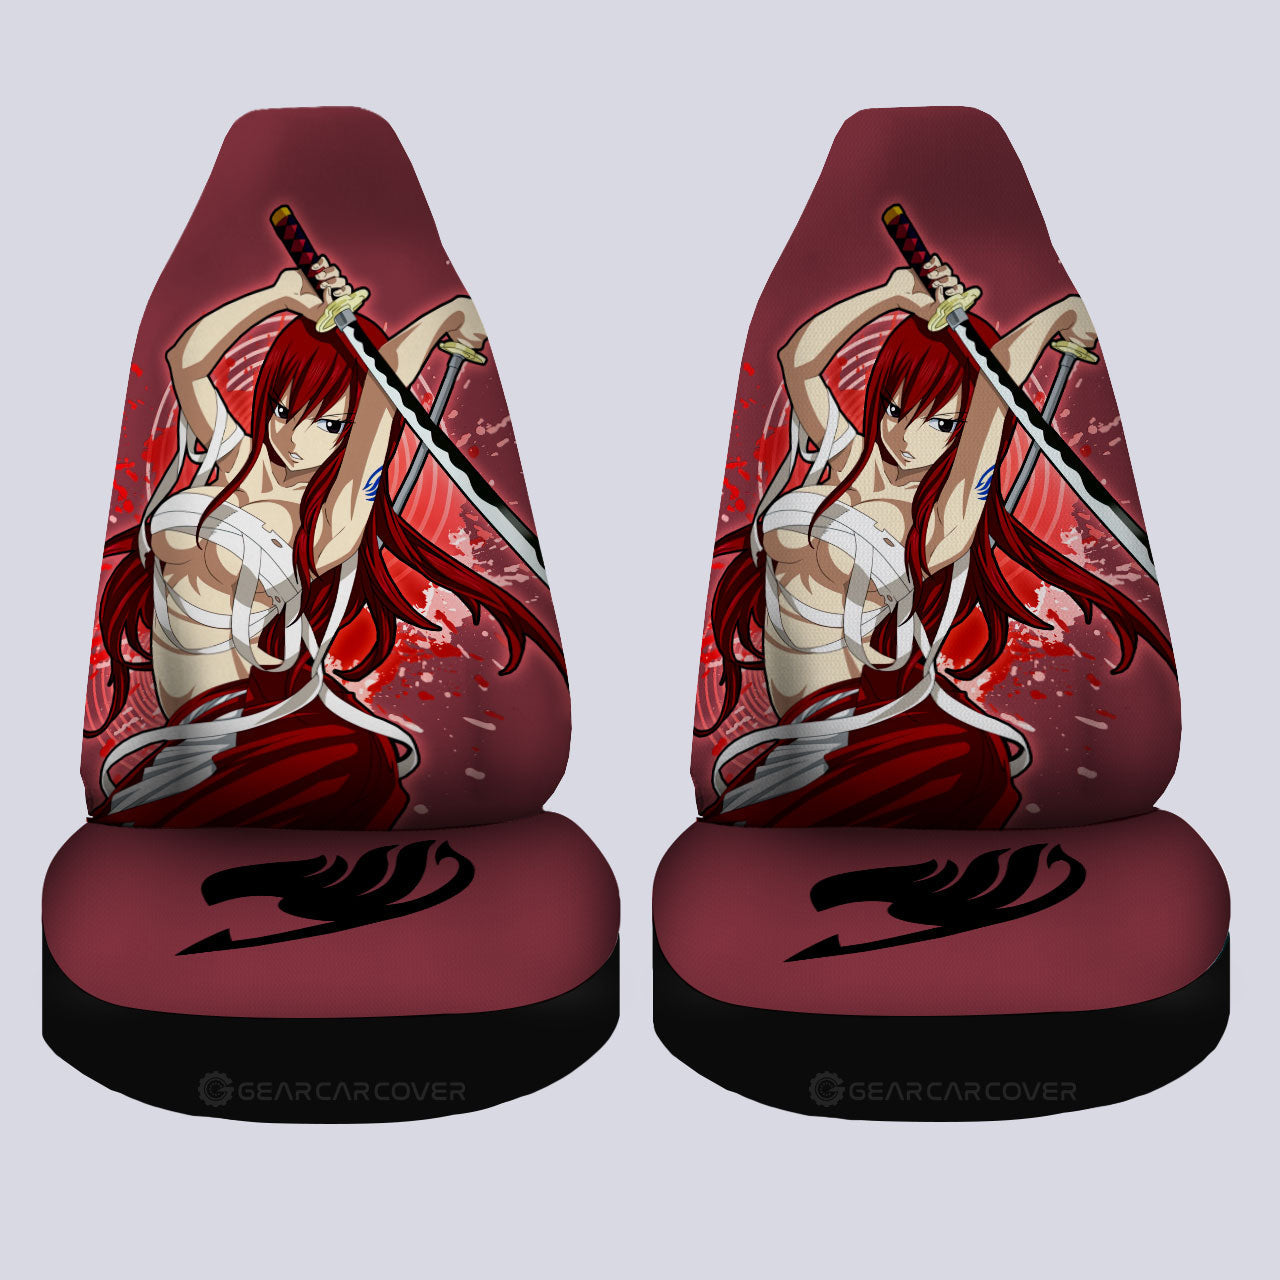 Anime Sexy Girl Erza Scarlet Car Seat Covers Custom Fairy Tail Anime - Gearcarcover - 4